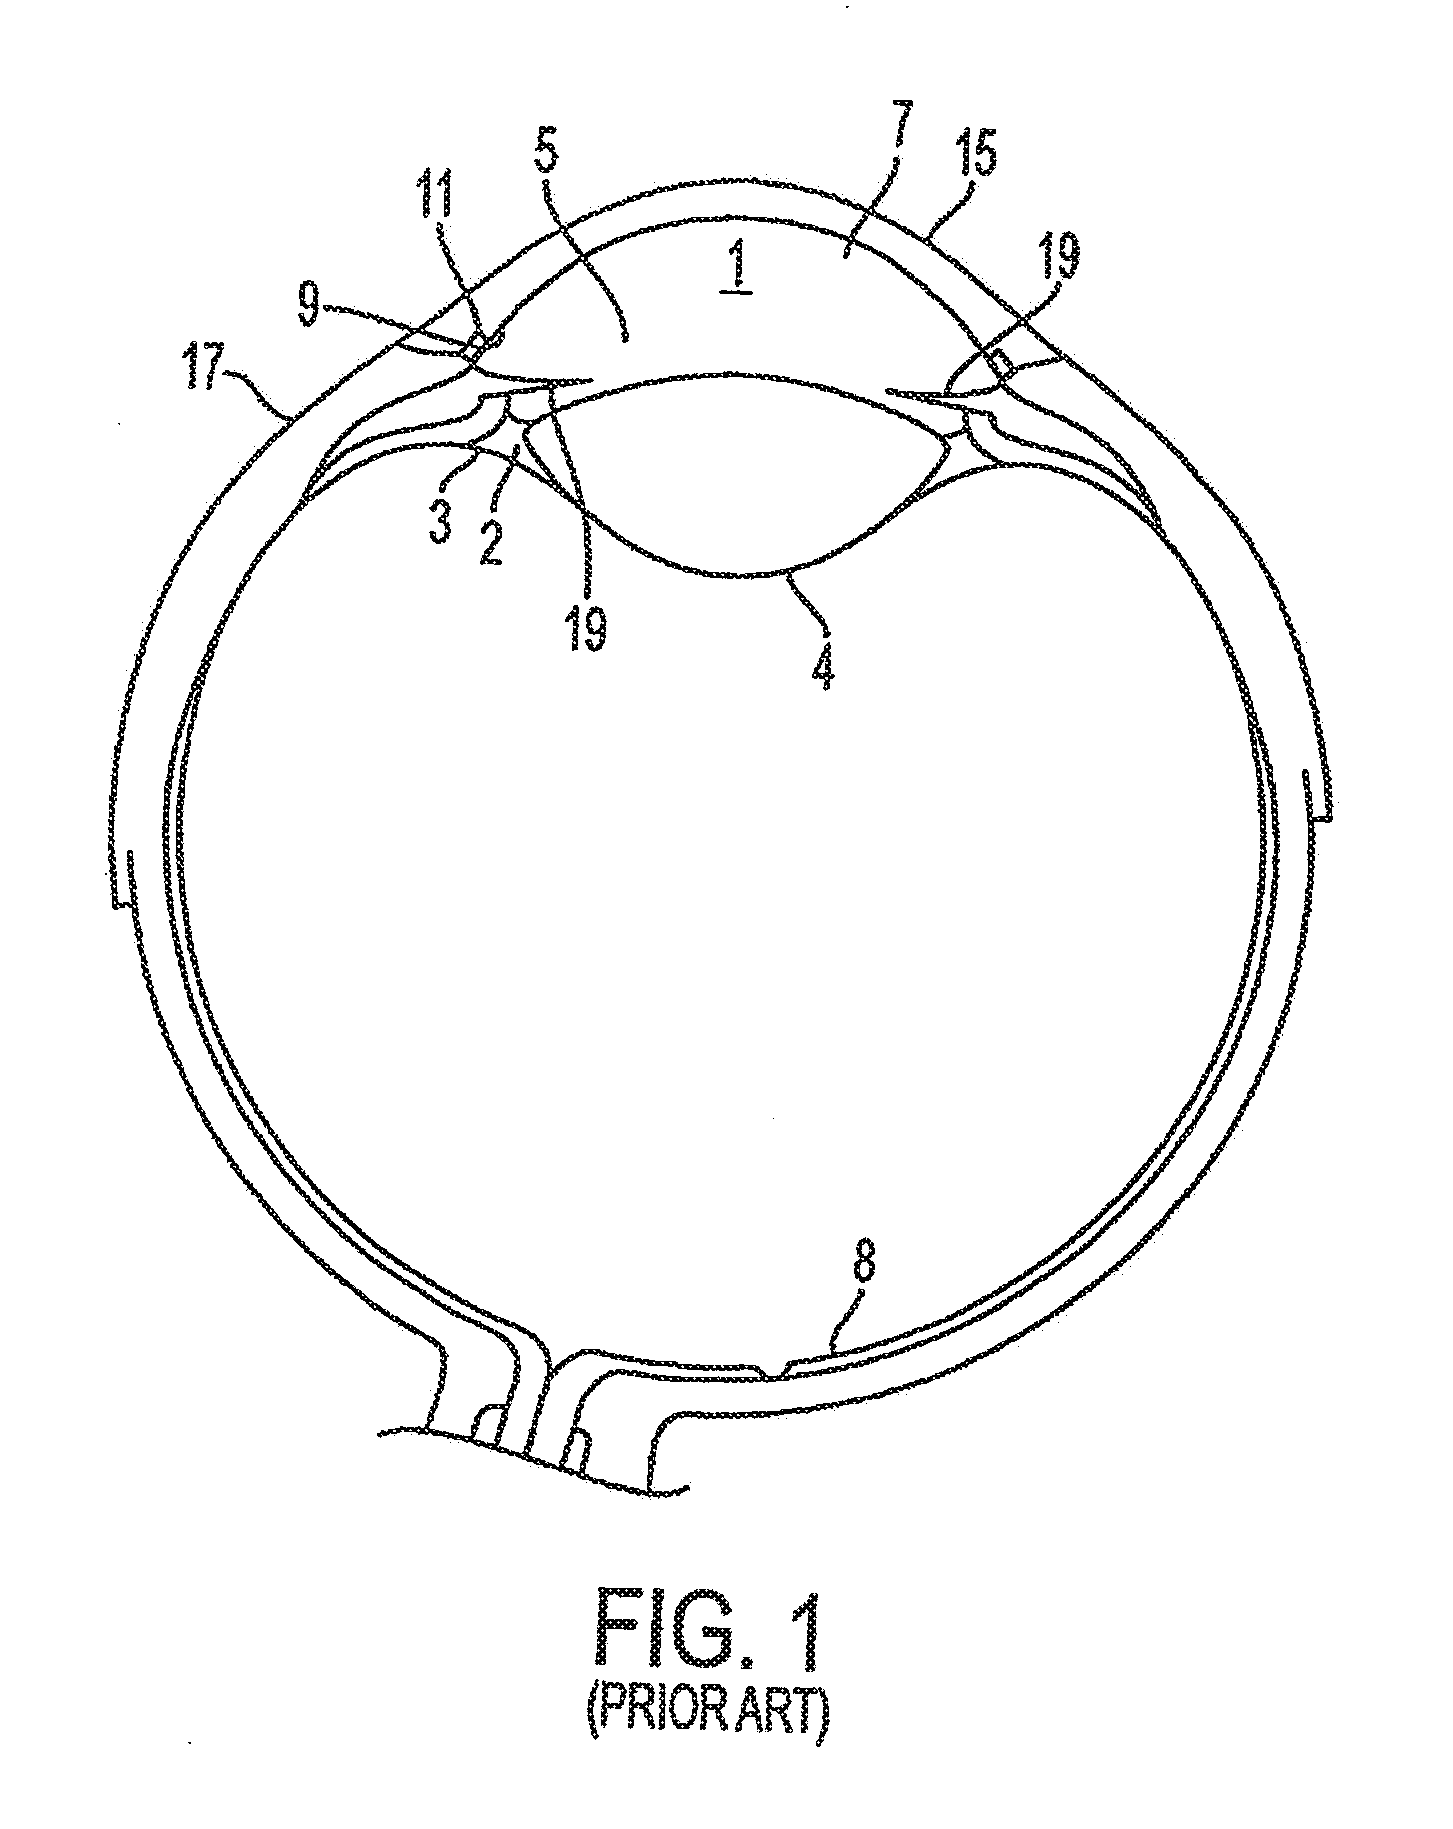 Delivery System and Method of Use for the Eye